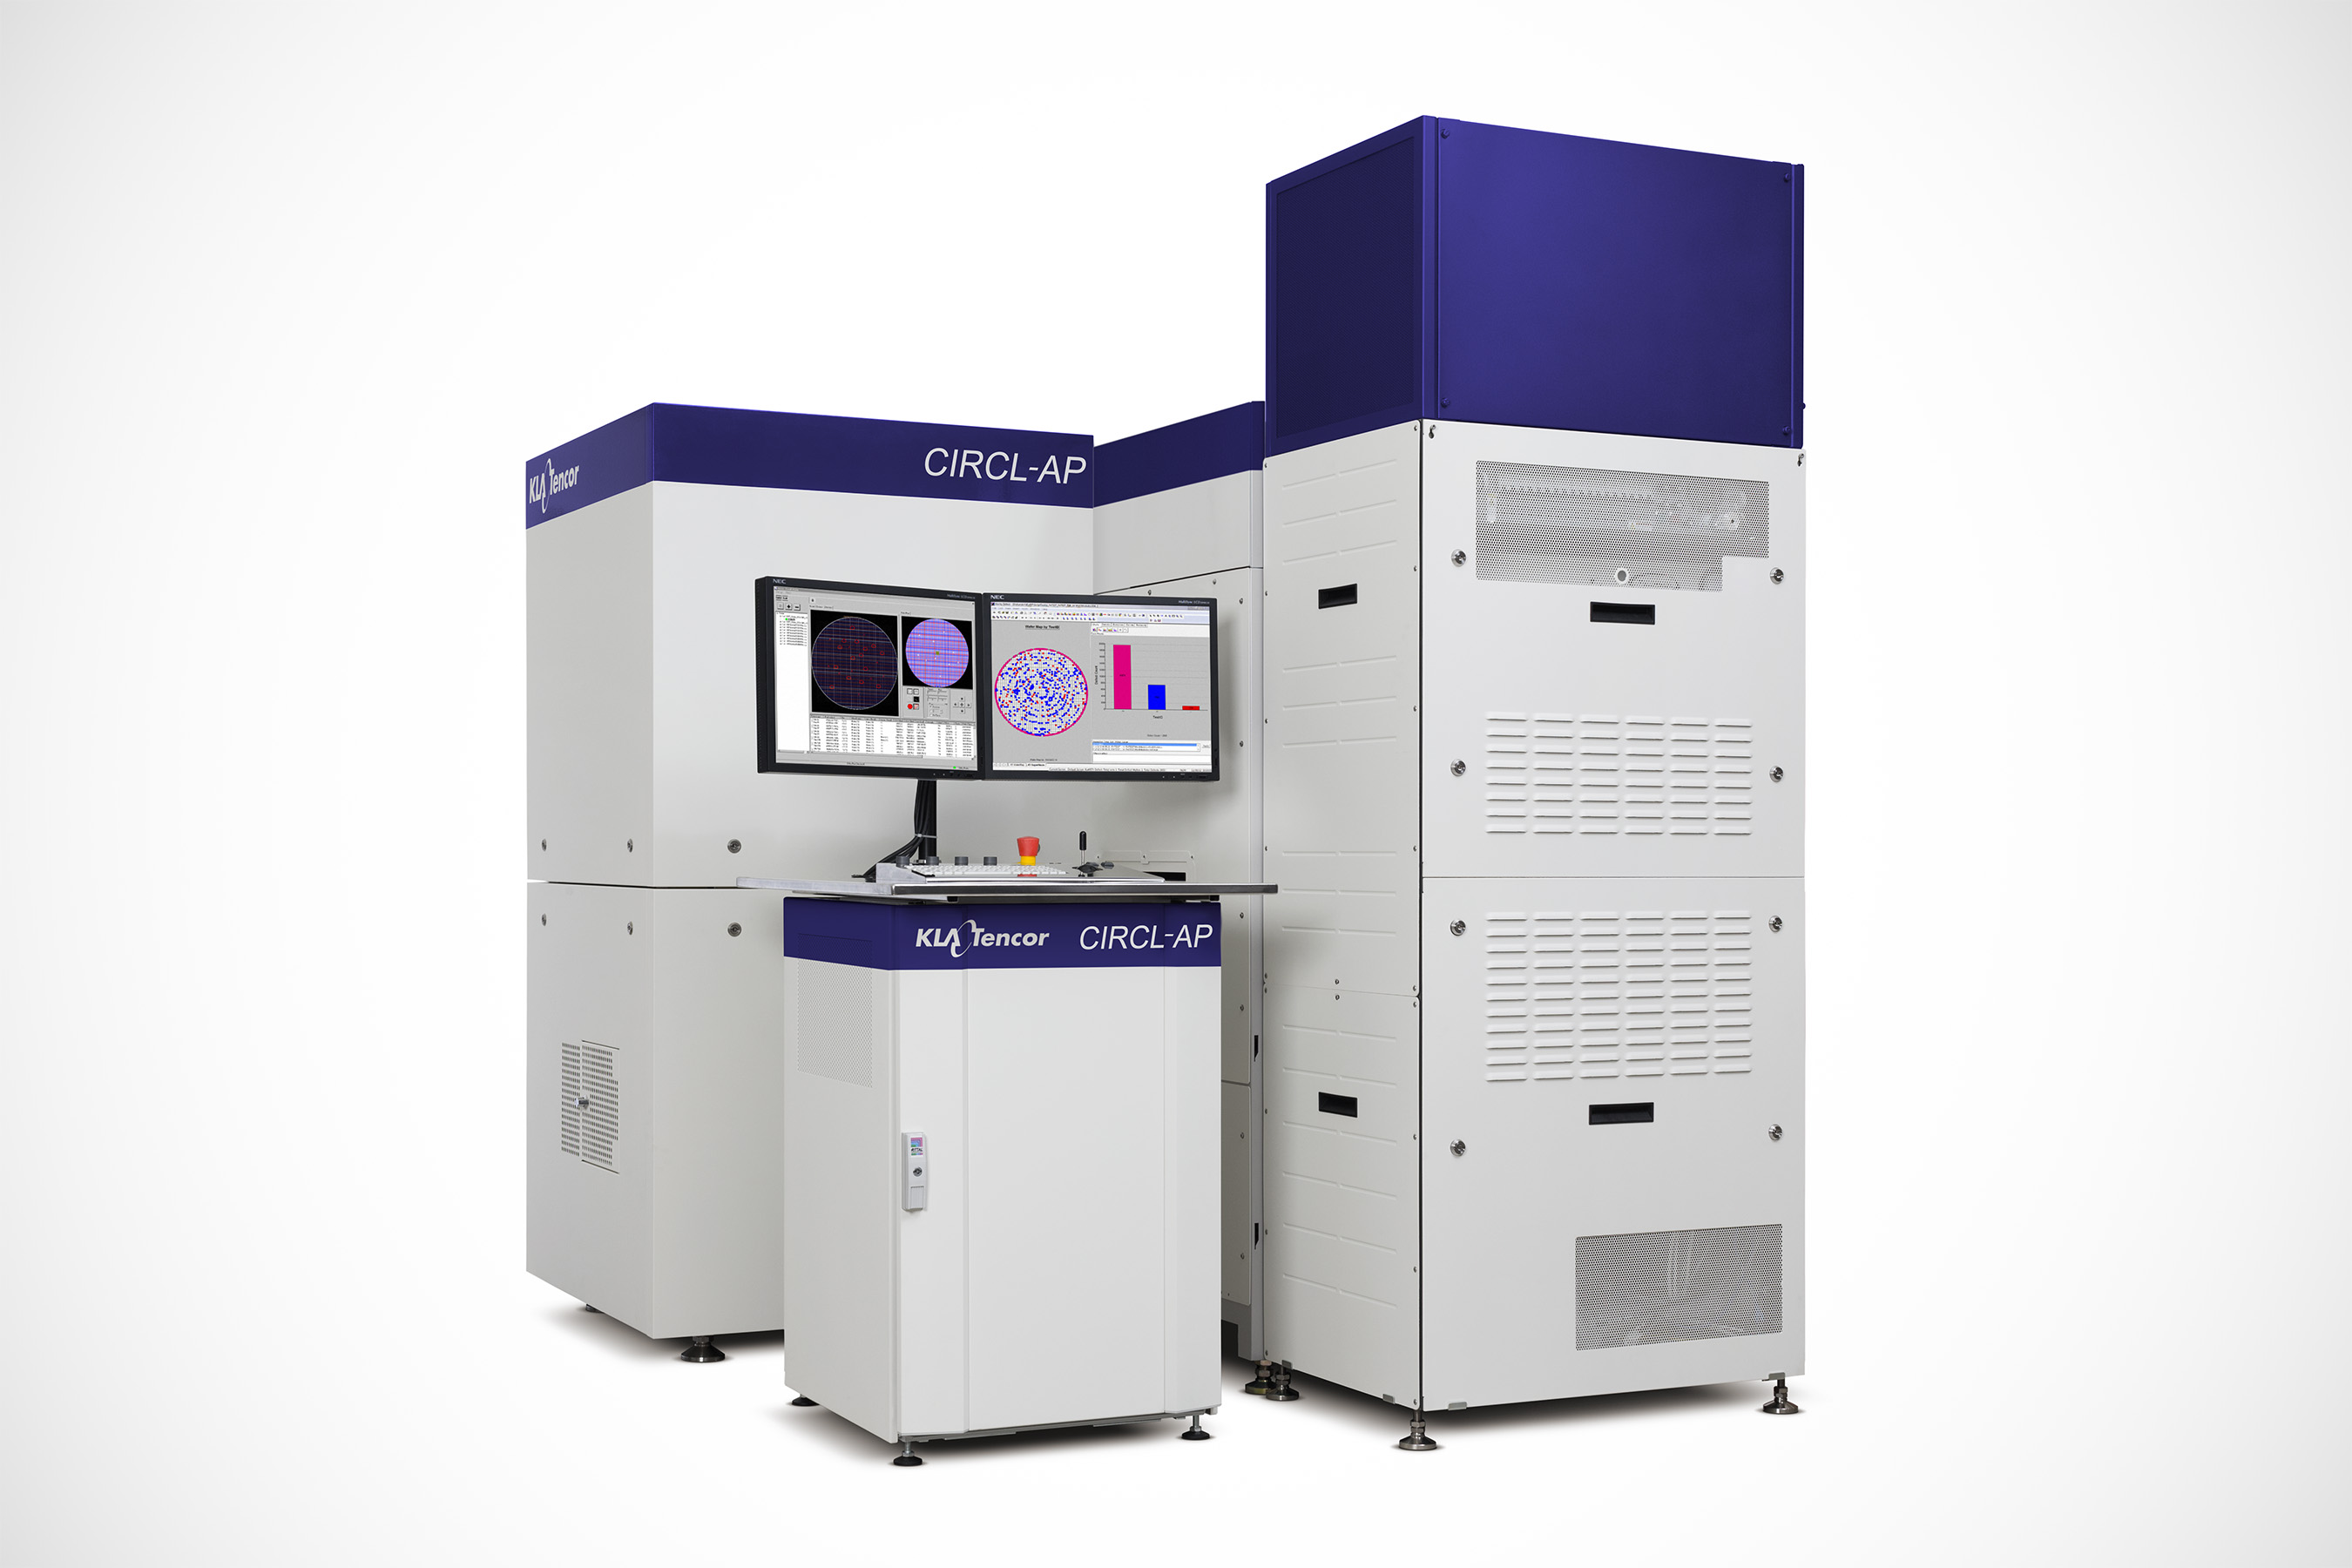 KLA-Tencor’s CIRCL-AP™ offers all-surface inspection, metrology and review at high throughput, enabling process control for diverse advanced wafer level packaging processes.